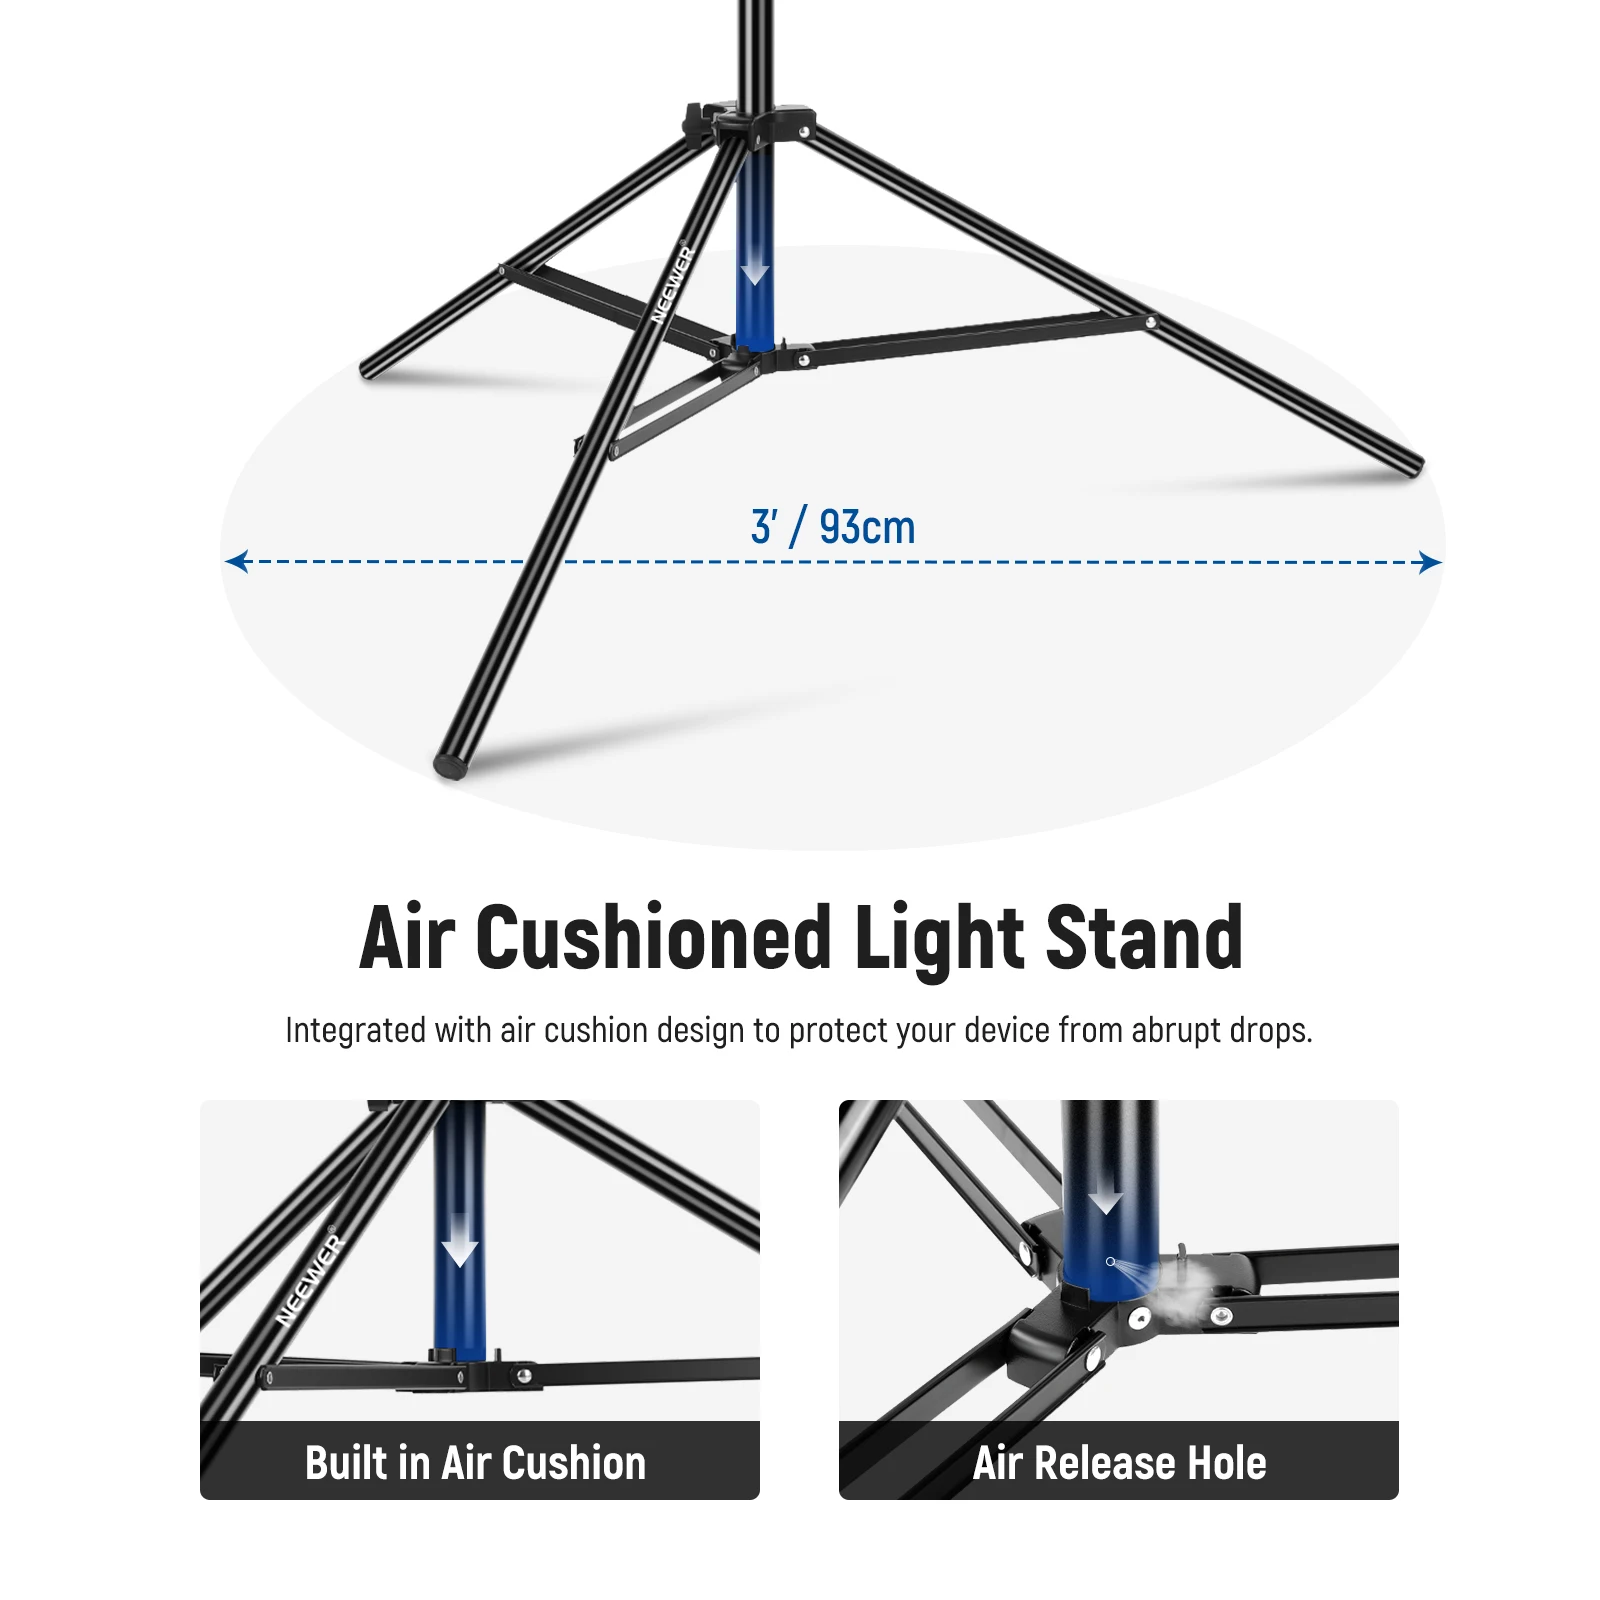 Neewer 10 Feet/3 Meters C-Stand Light Stand with 4 Feet/1.2 Meters  Extension Boom Arm, 2 Pieces Grip Head and Carry Bag for Photography Studio  Video Reflector, Umbrella, Monolight, etc (Basic Version) 